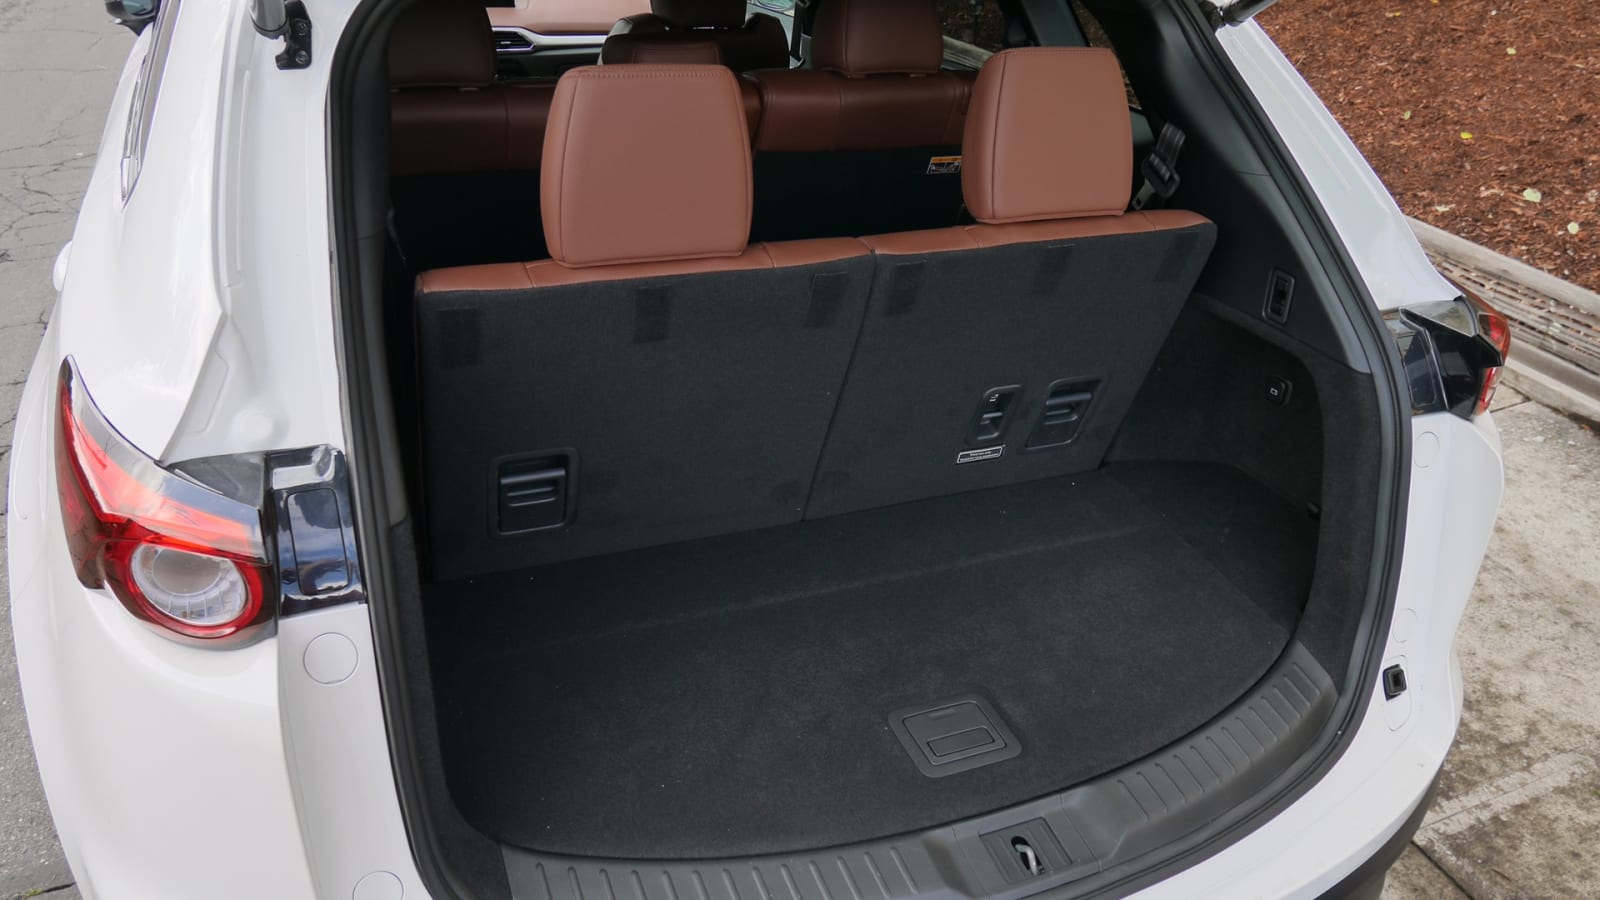 Mazda Cx 9 Luggage Test How Much Fits In The Cargo Area